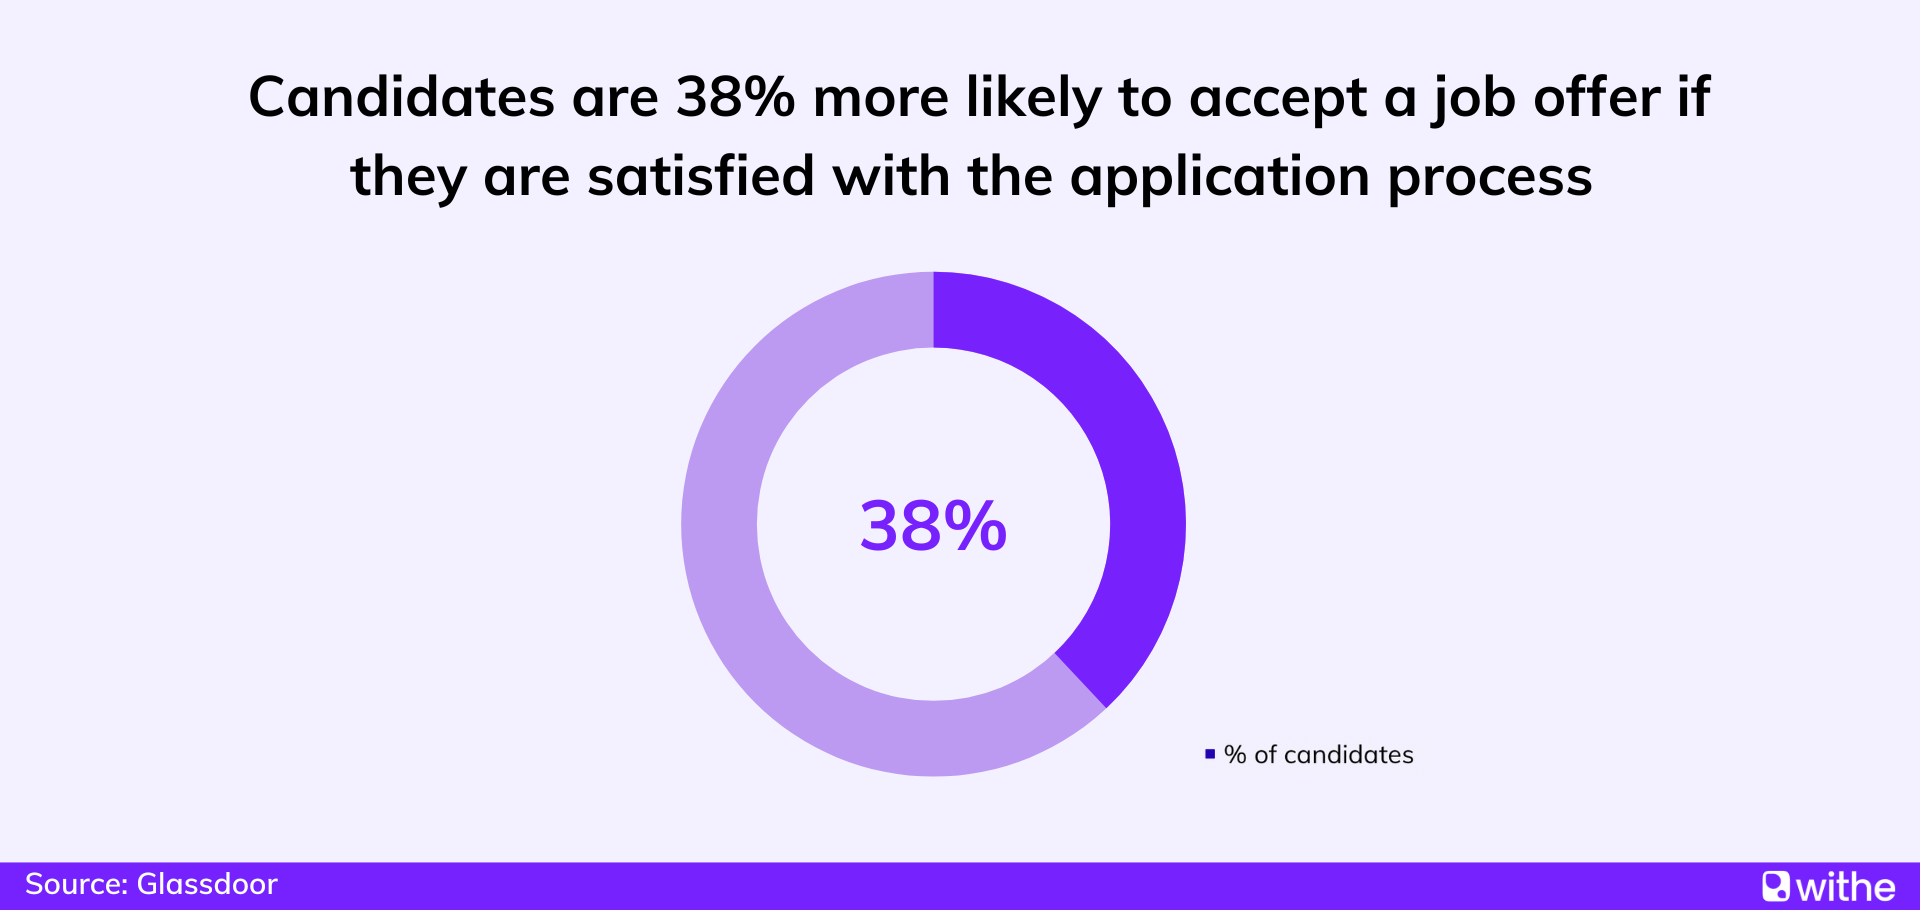 Candidate experience statistics - Candidates are 38% more likely to accept a job offer if they are satisfied with the application process